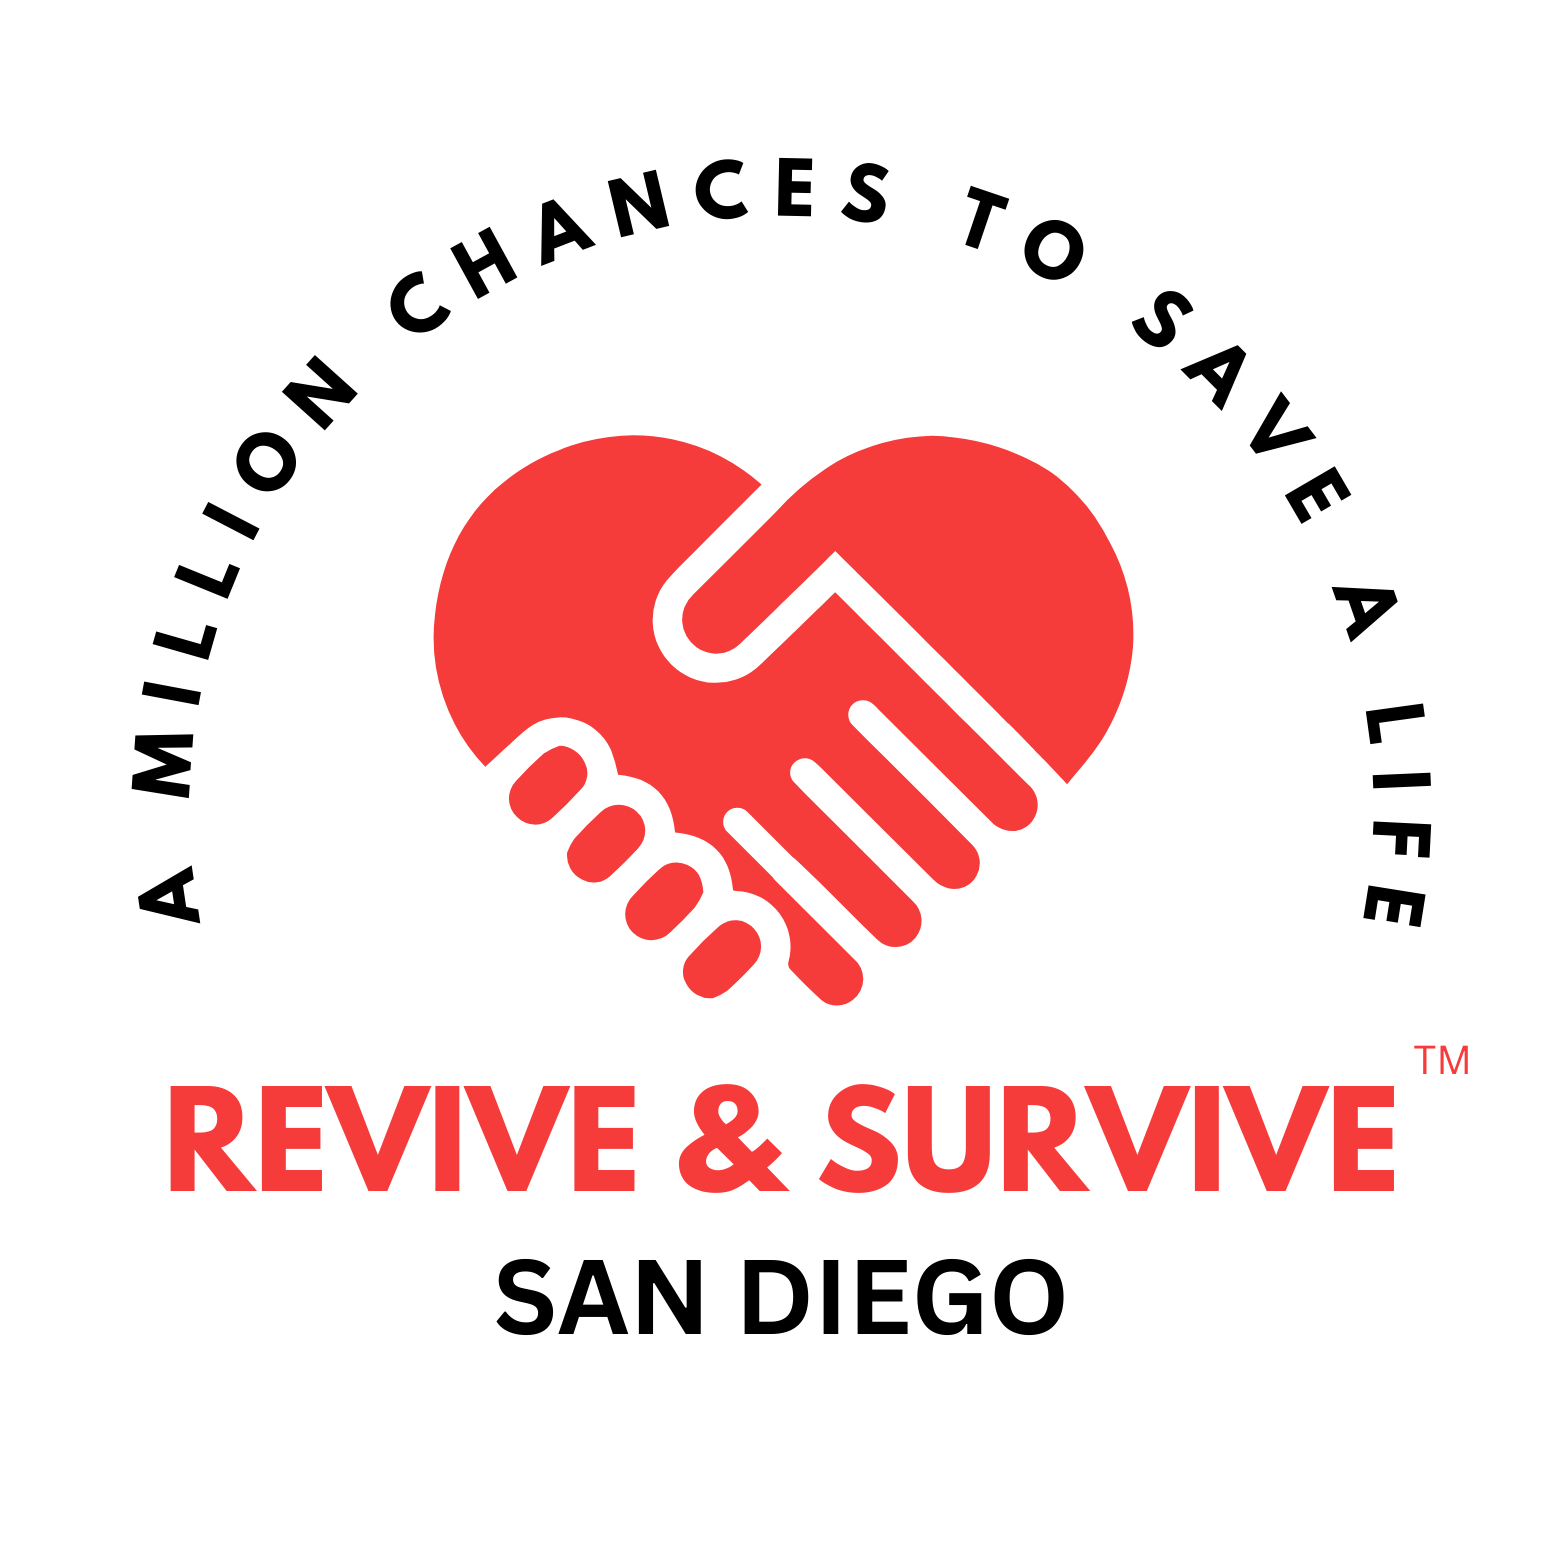 Revive & Survive San Diego logo with two red hands and text 